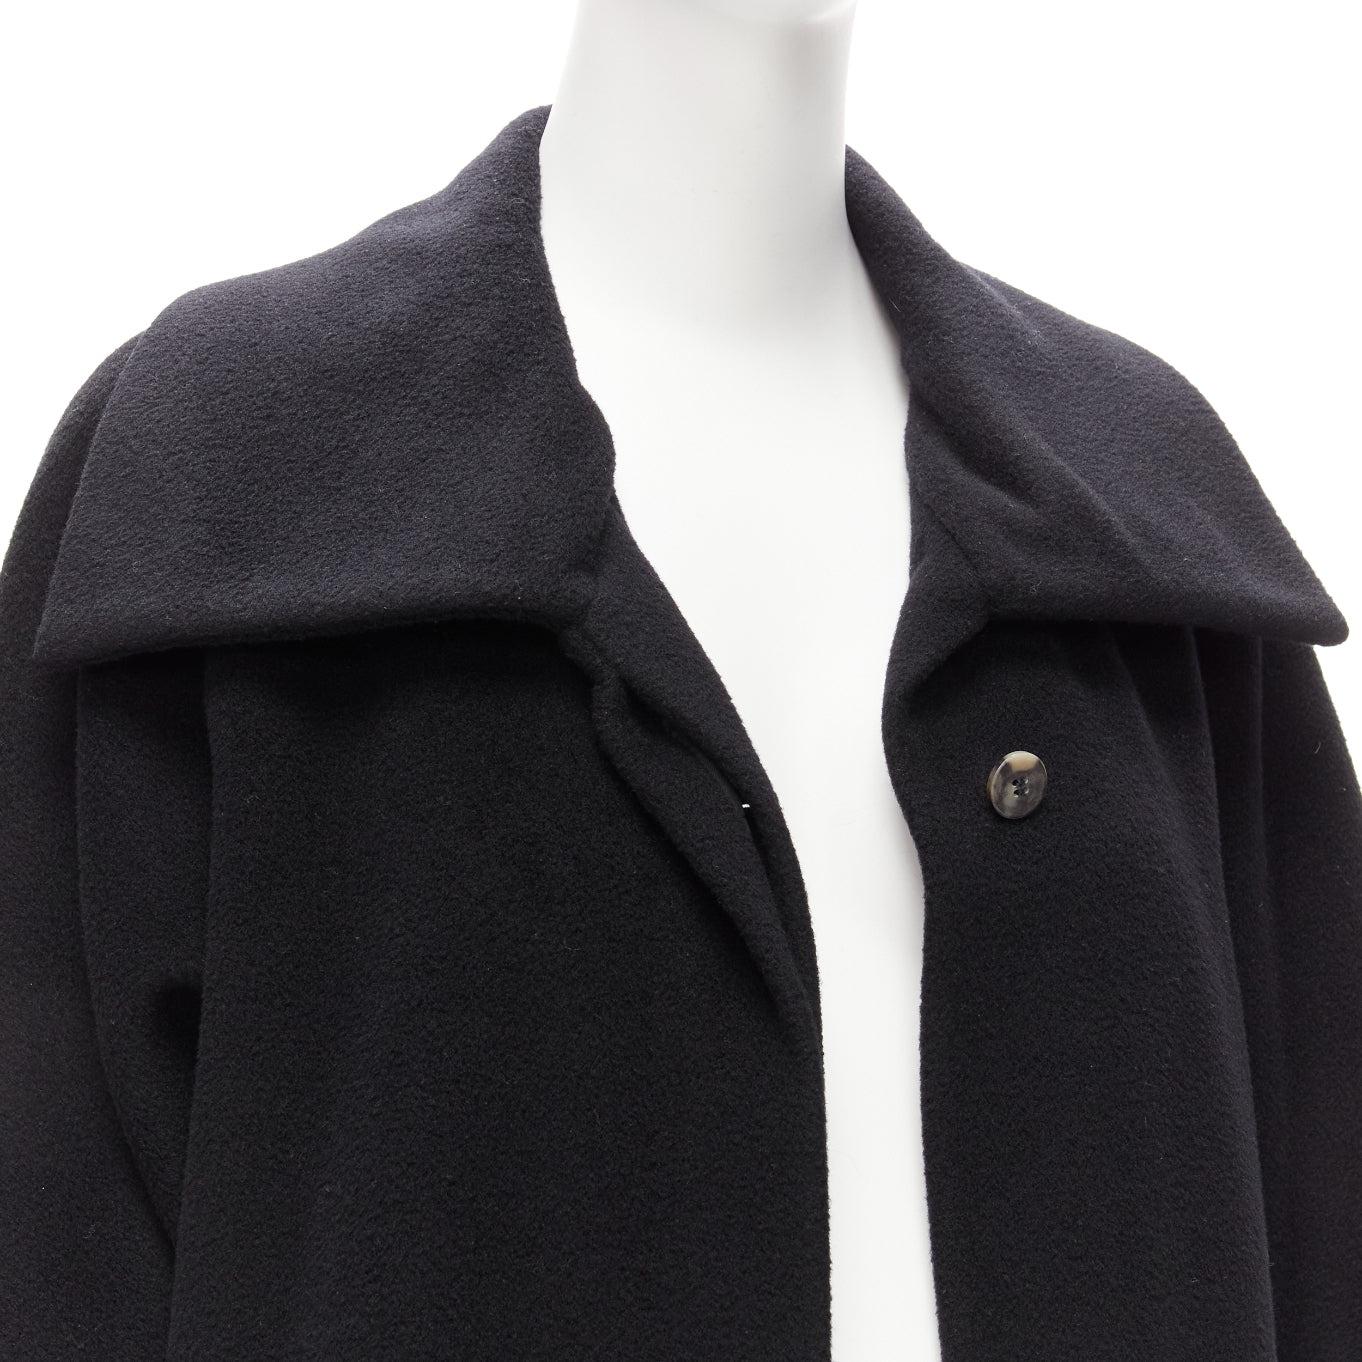 MAX MARA black virgin wool cashmere wide collar long coat IT42 M
Reference: TGAS/D00870
Brand: Max Mara
Material: Virgin Wool, Cashmere
Color: Black
Pattern: Solid
Closure: Button
Lining: Black Fabric
Extra Details: Hidden button stand. Single vent